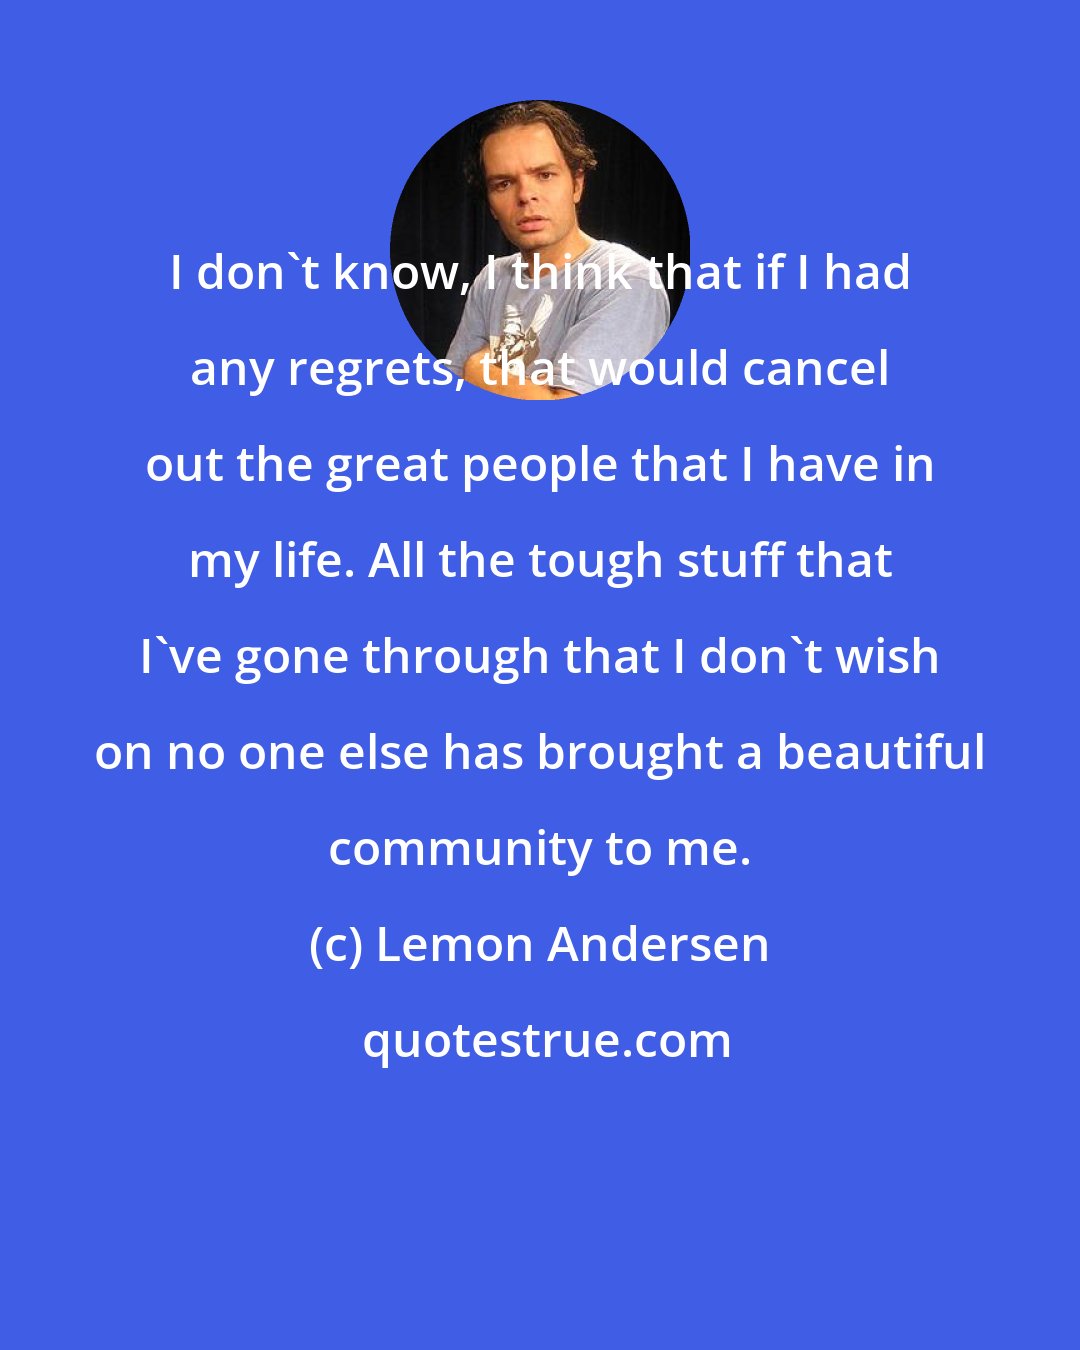 Lemon Andersen: I don't know, I think that if I had any regrets, that would cancel out the great people that I have in my life. All the tough stuff that I've gone through that I don't wish on no one else has brought a beautiful community to me.